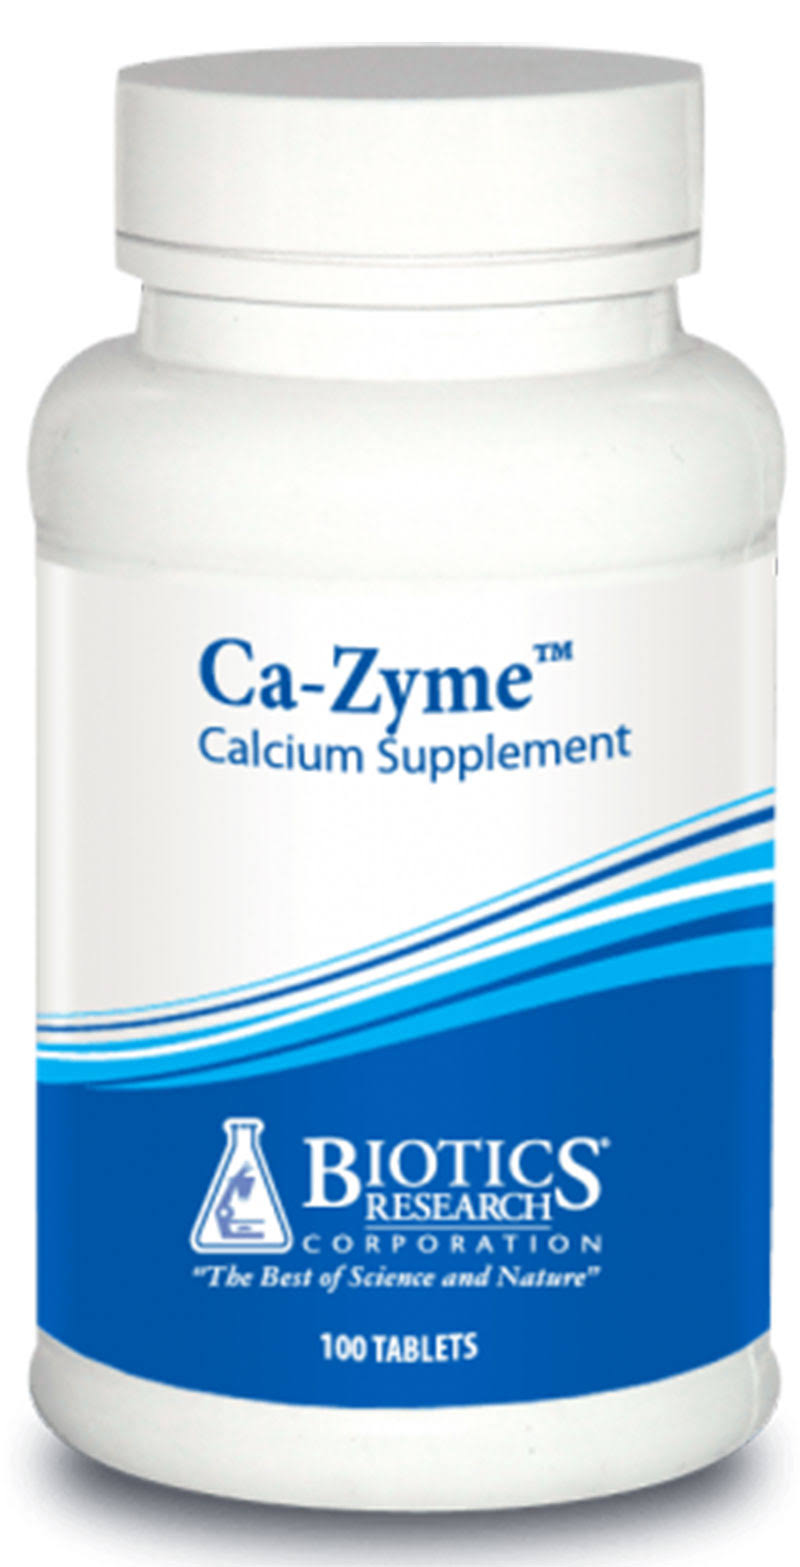 Biotics Research - Ca-Zyme - 100 Tablets